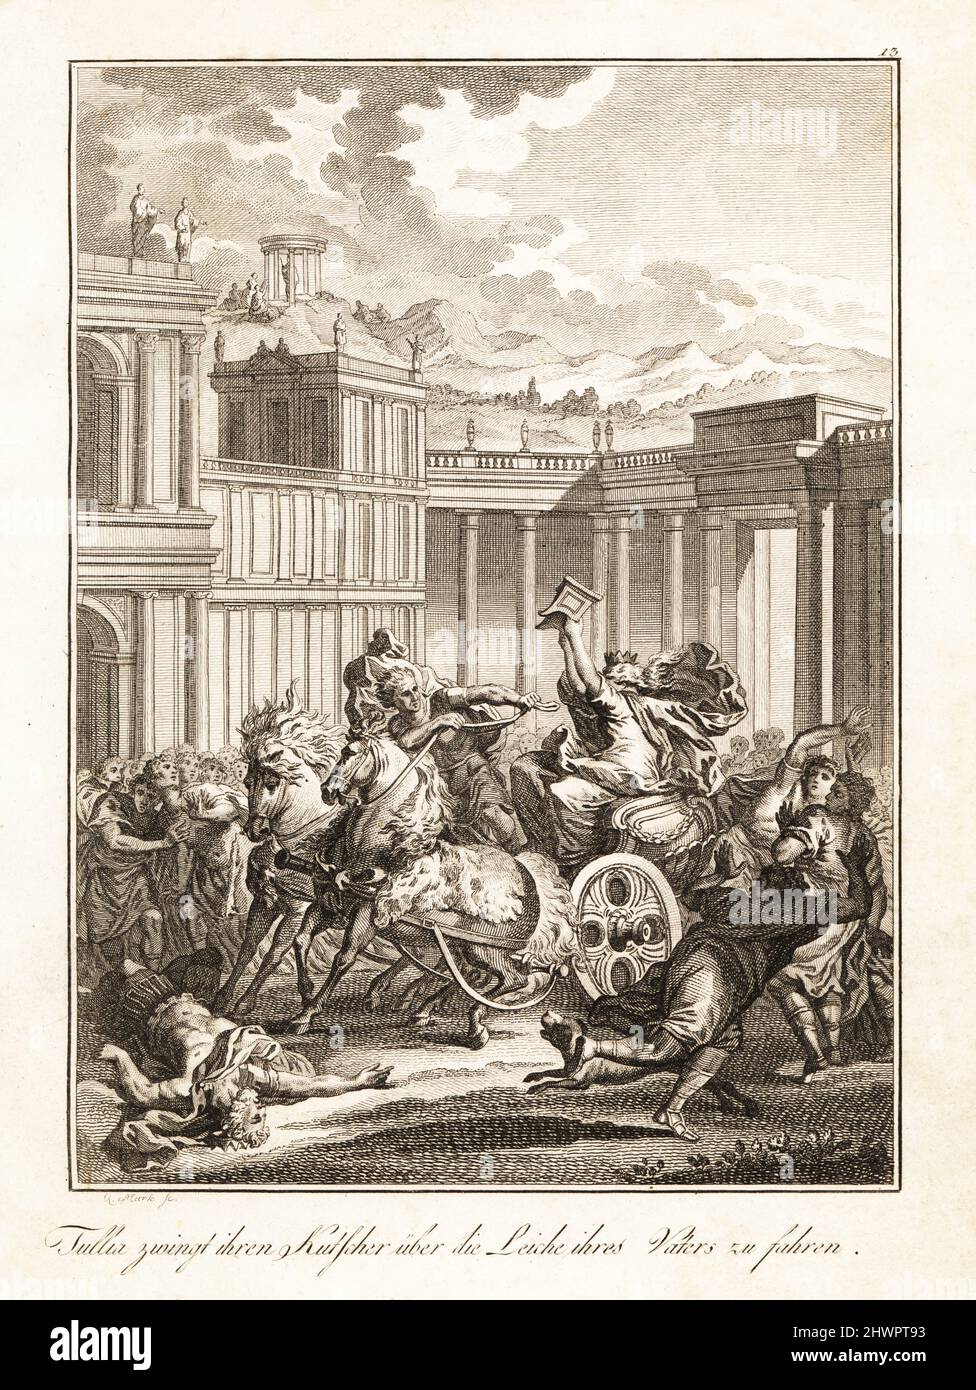 Tullia, the last Queen of Rome, orders her charioteer to drive over the corpse of her assassinated father King Servius Tullius, 535 BC. Tullie veut forcer le conducteur de son chariot a passer sur le cadavre de son pere. Copperplate engraving by Quirin Mark  after a design by Charles-Dominique-Joseph Eisen from Professor Joseph Rudolf Zappe’s Gemalde aus der romischen Geschichte, Pictures of Roman History, Joseph Schalbacher, Vienna, 1800. German edition of Abbe Claude Francois Xavier Millot’s Abrege de l’Histoire Romaine. Stock Photo